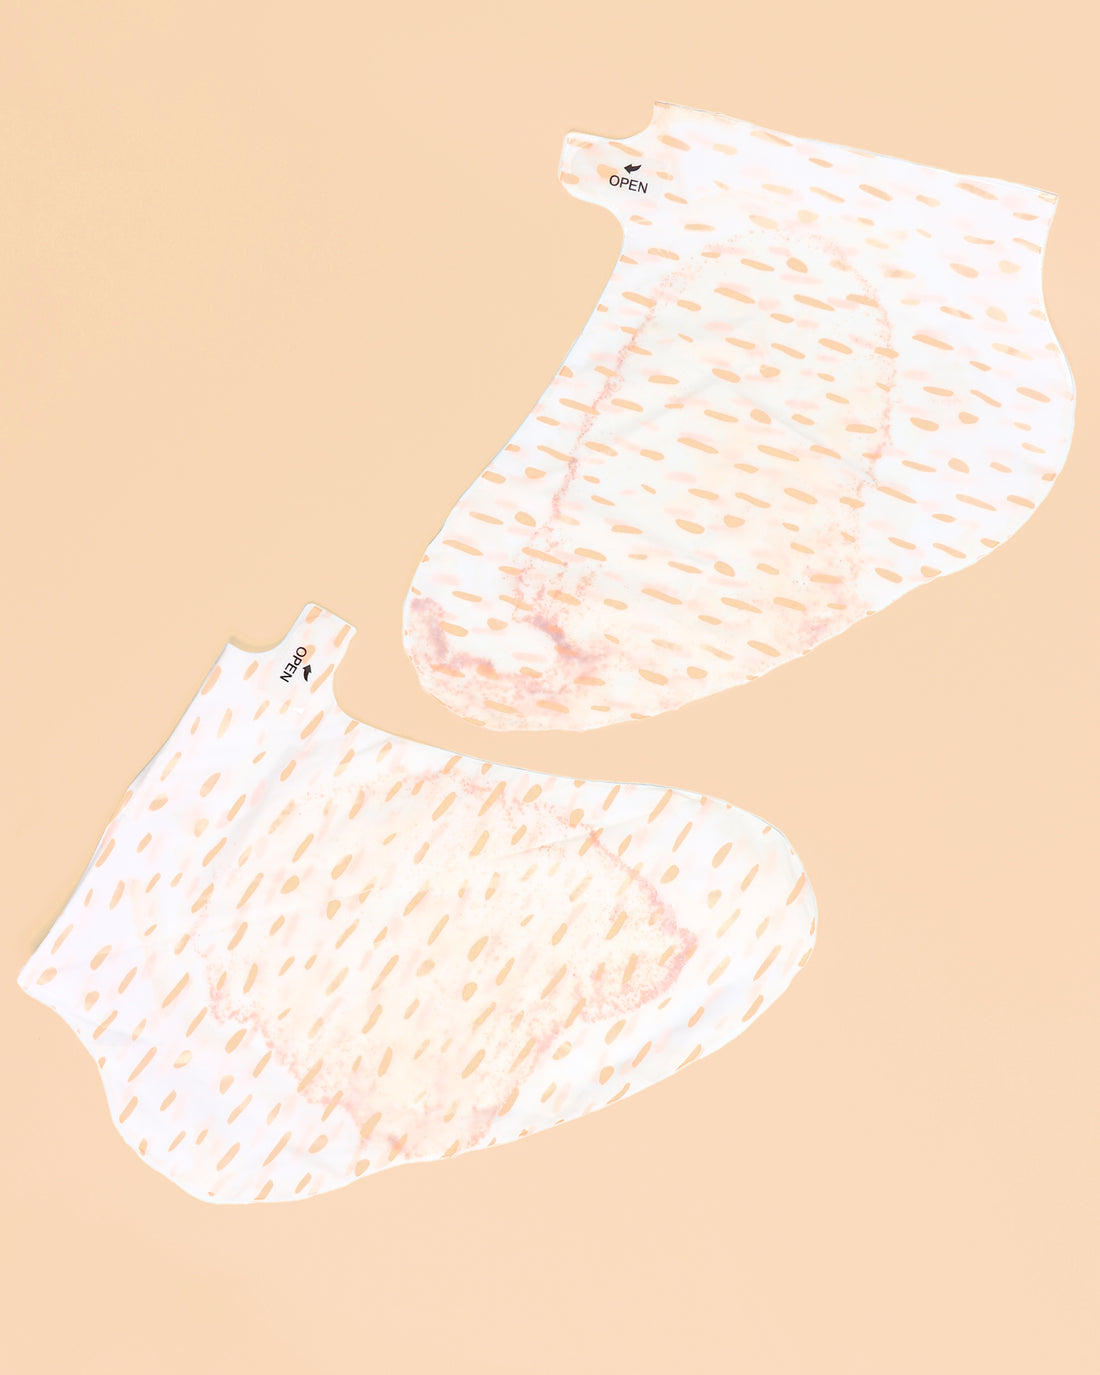 Sole_mates_foot_mask_packet_3-355